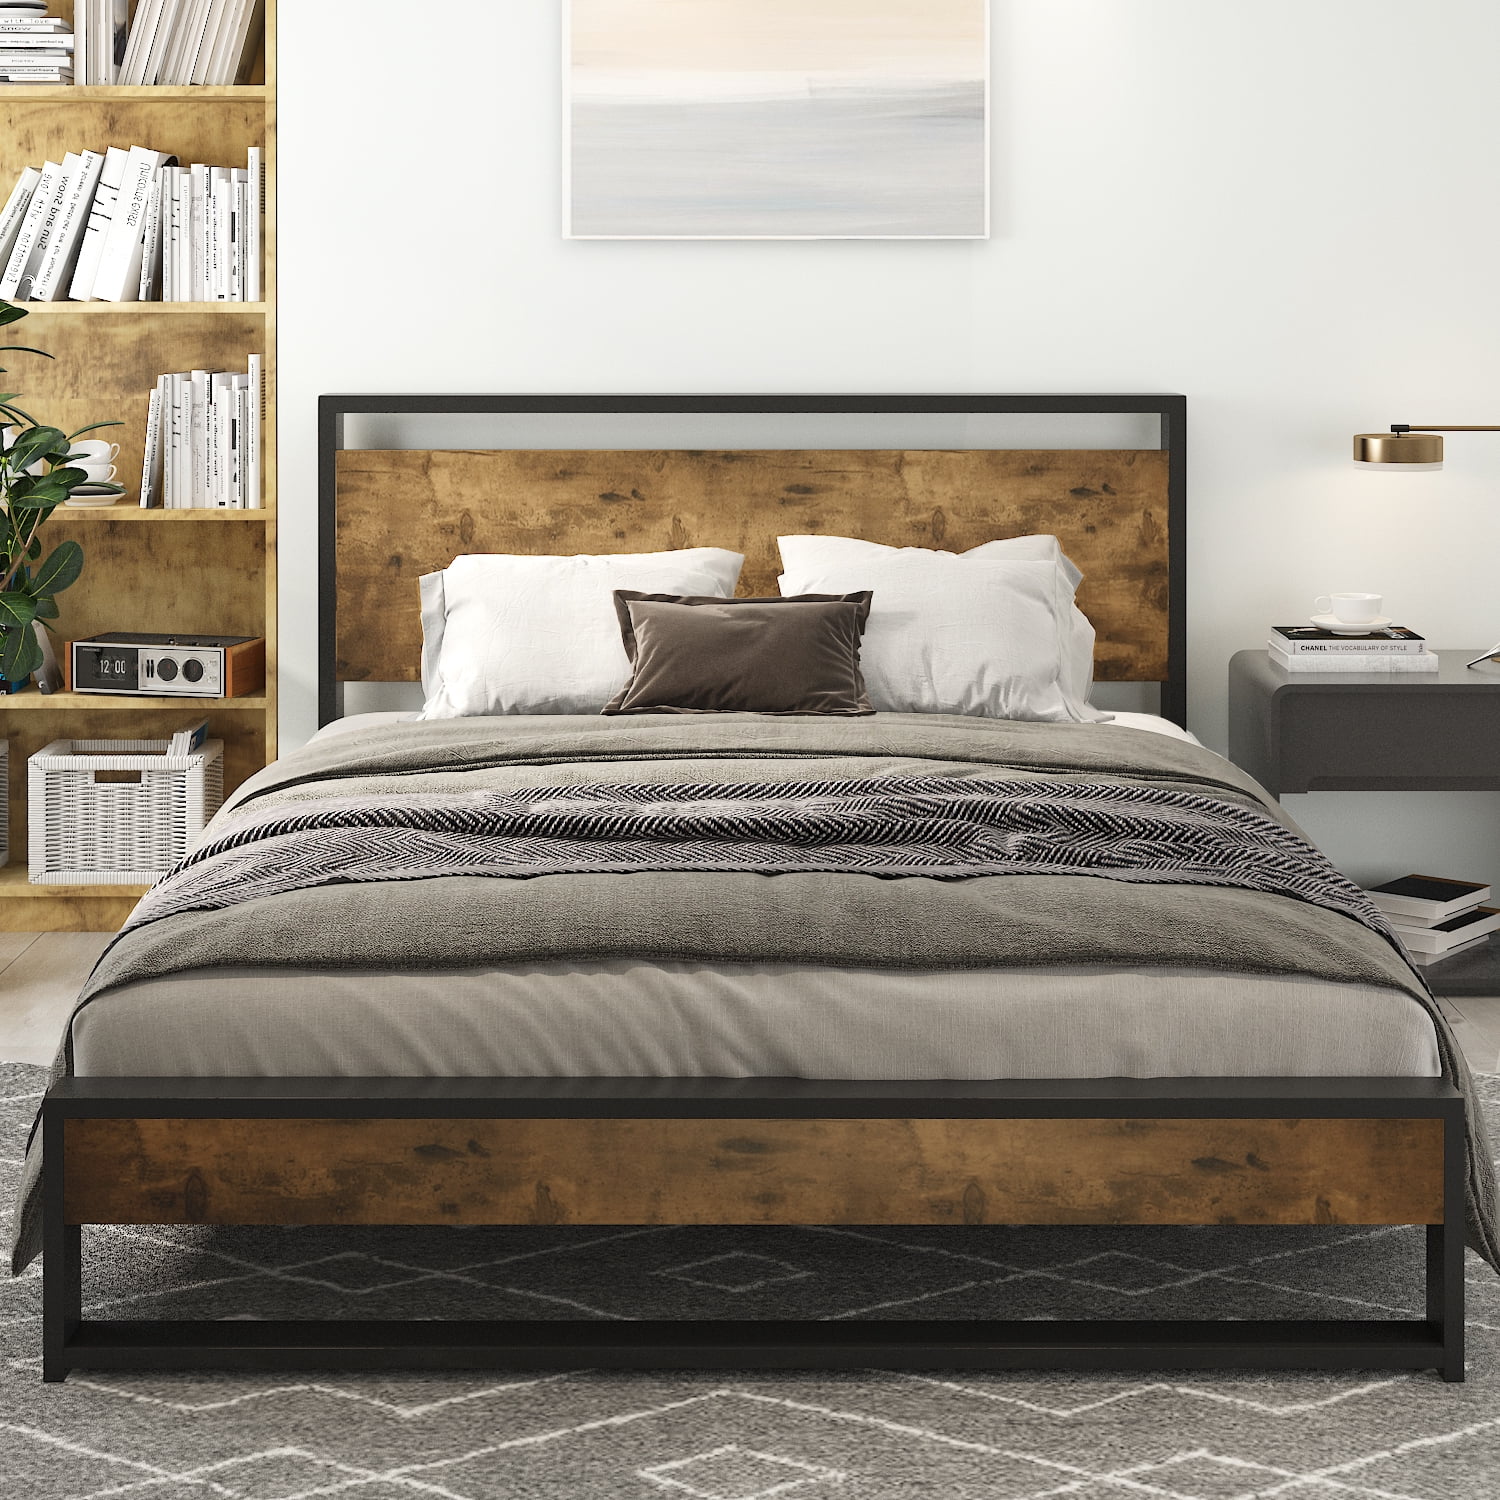 Amolife Queen Bed Frame With Wooden, Light Brown Wood Headboard